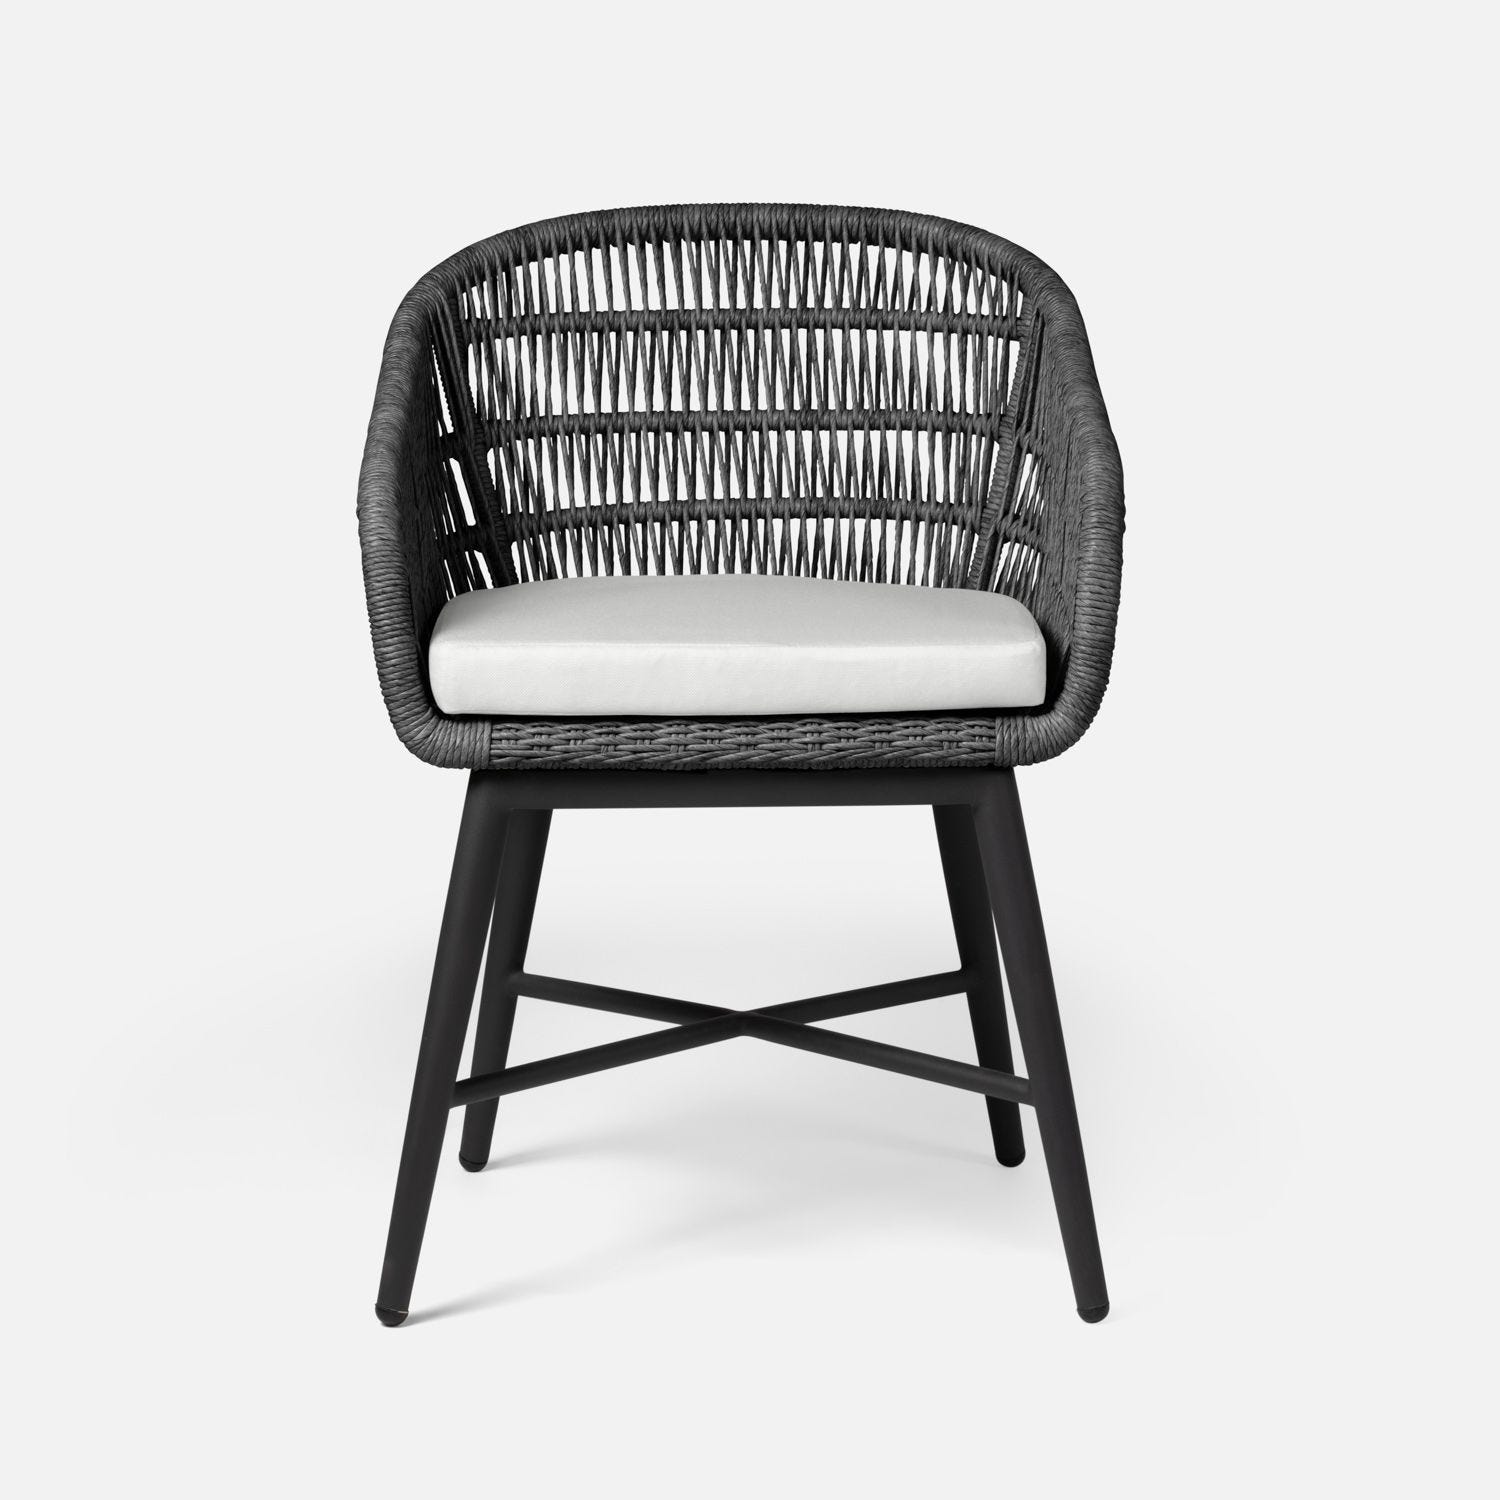 Outdoor Jo Rope Dining Chair with Charcoal Base - Mecox Gardens